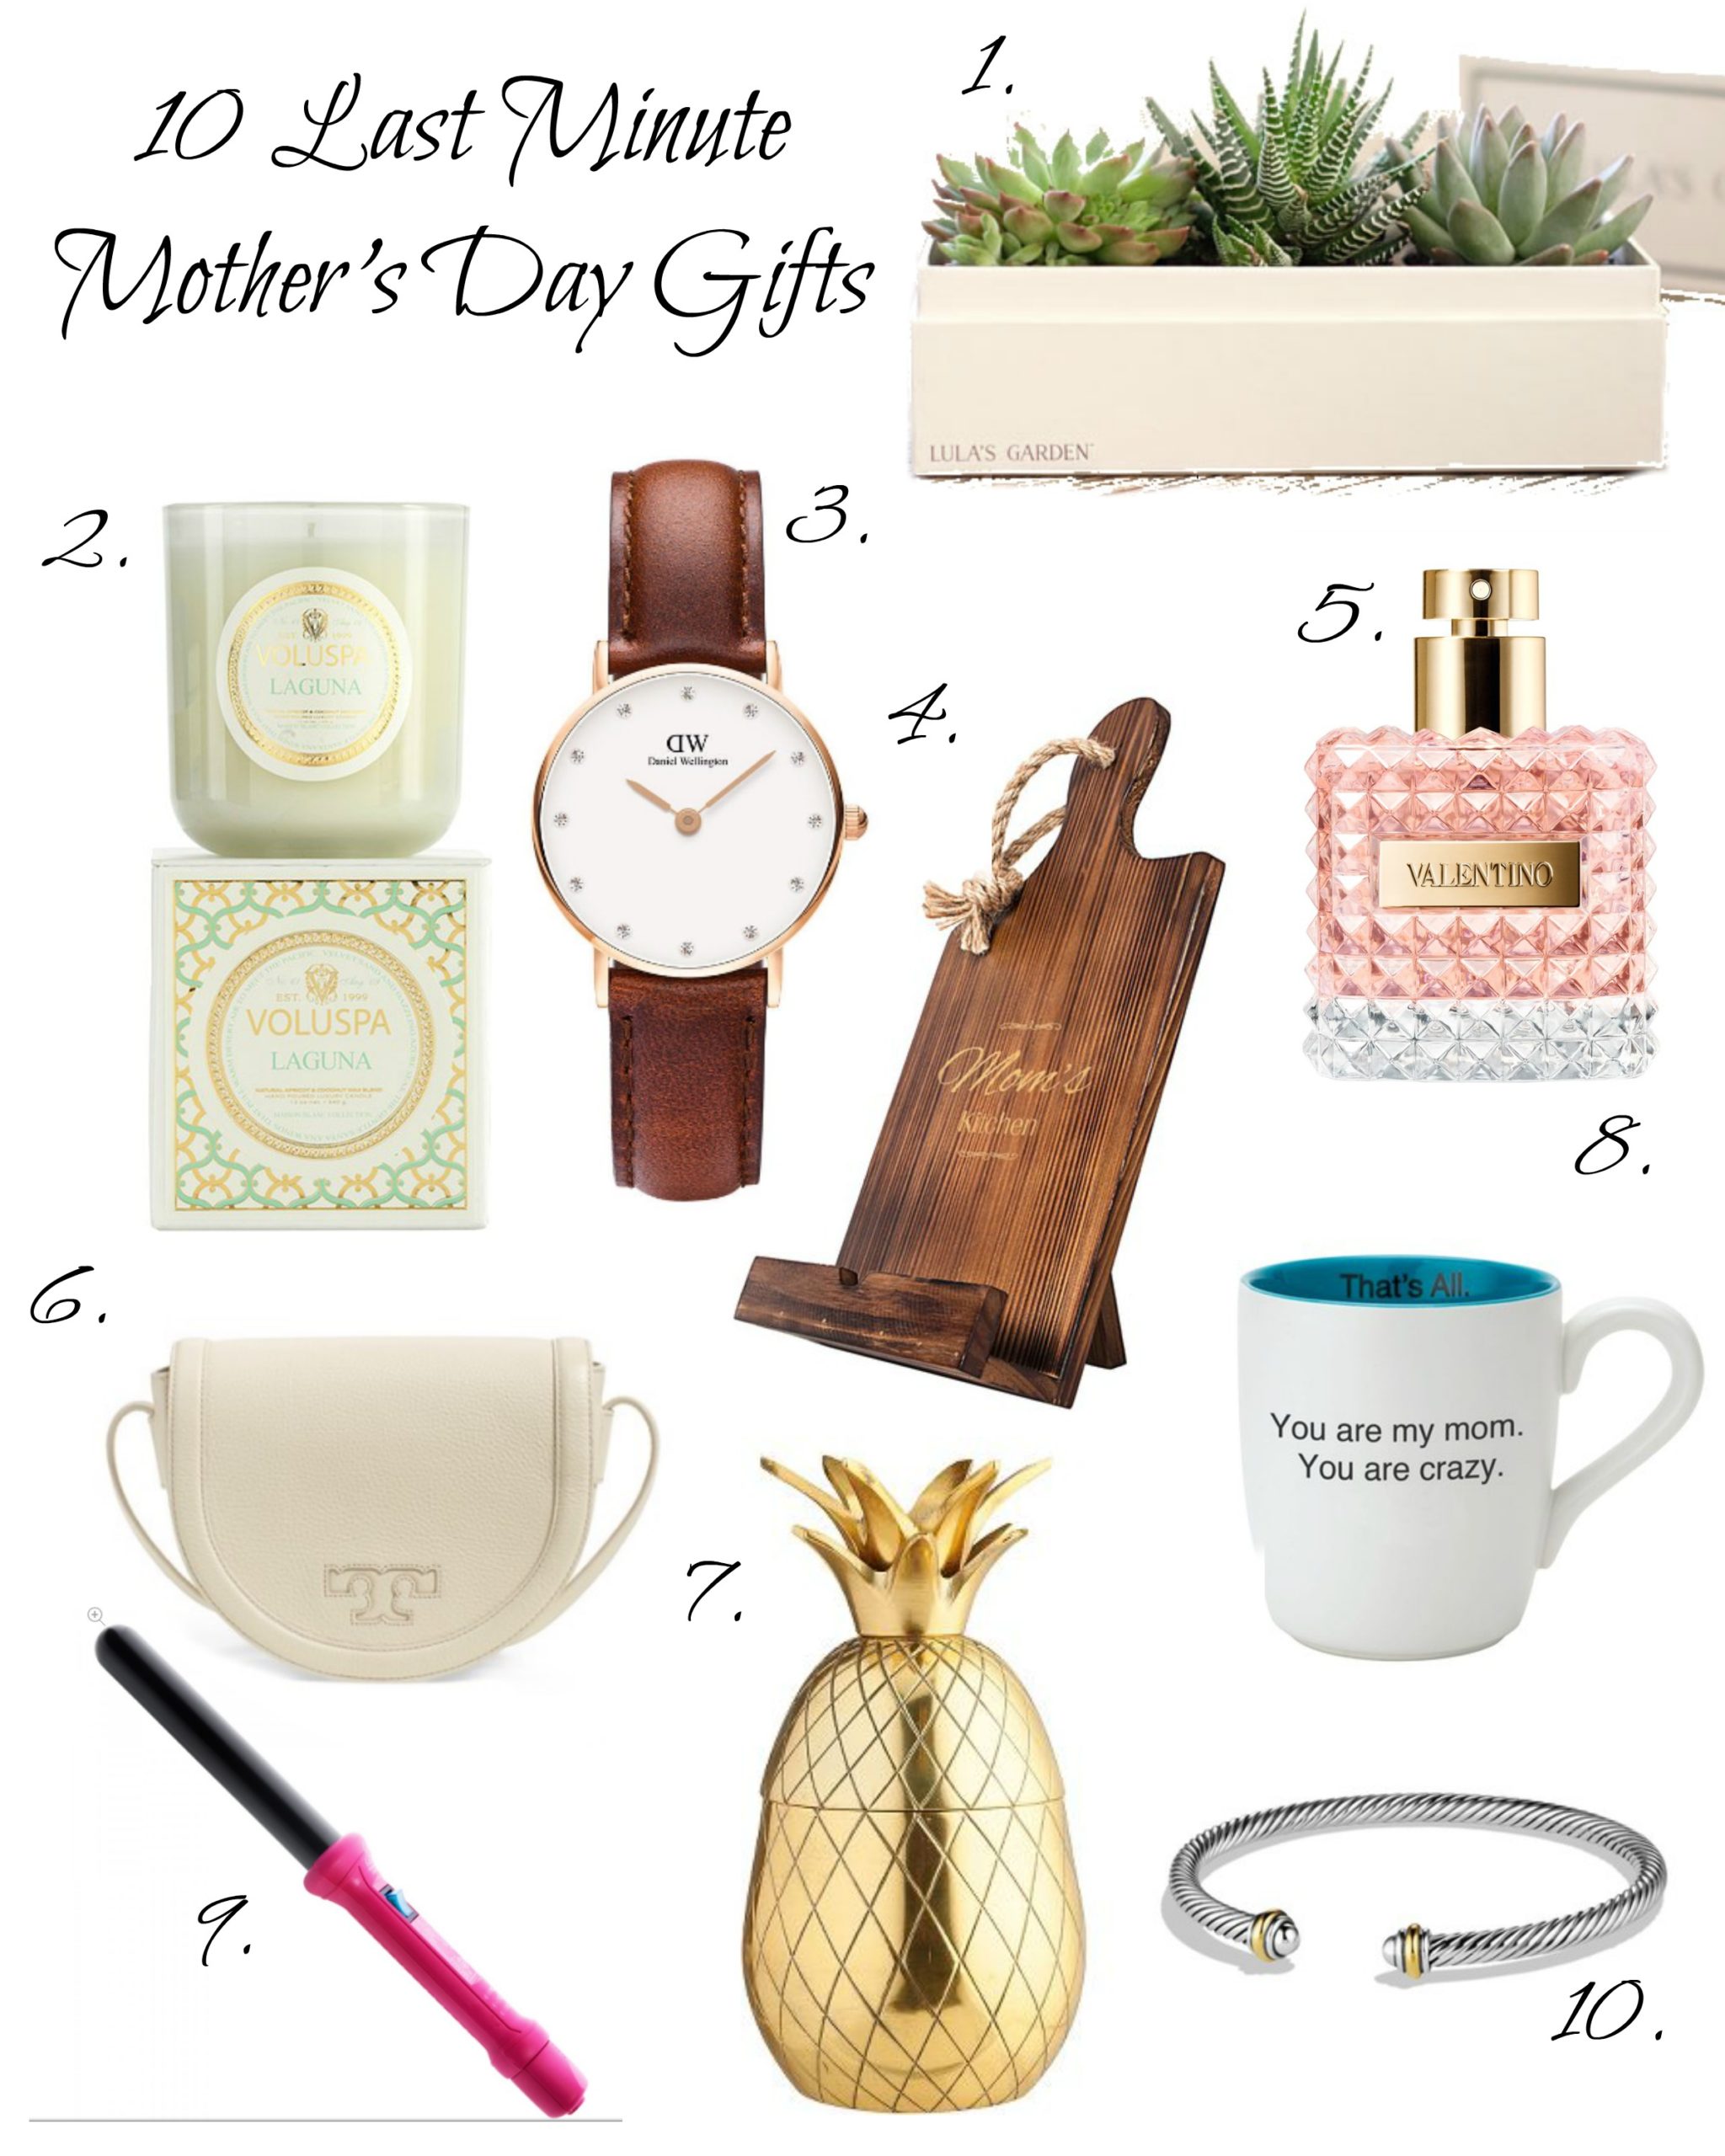 10 Last Minute Mother’s Day Gifts